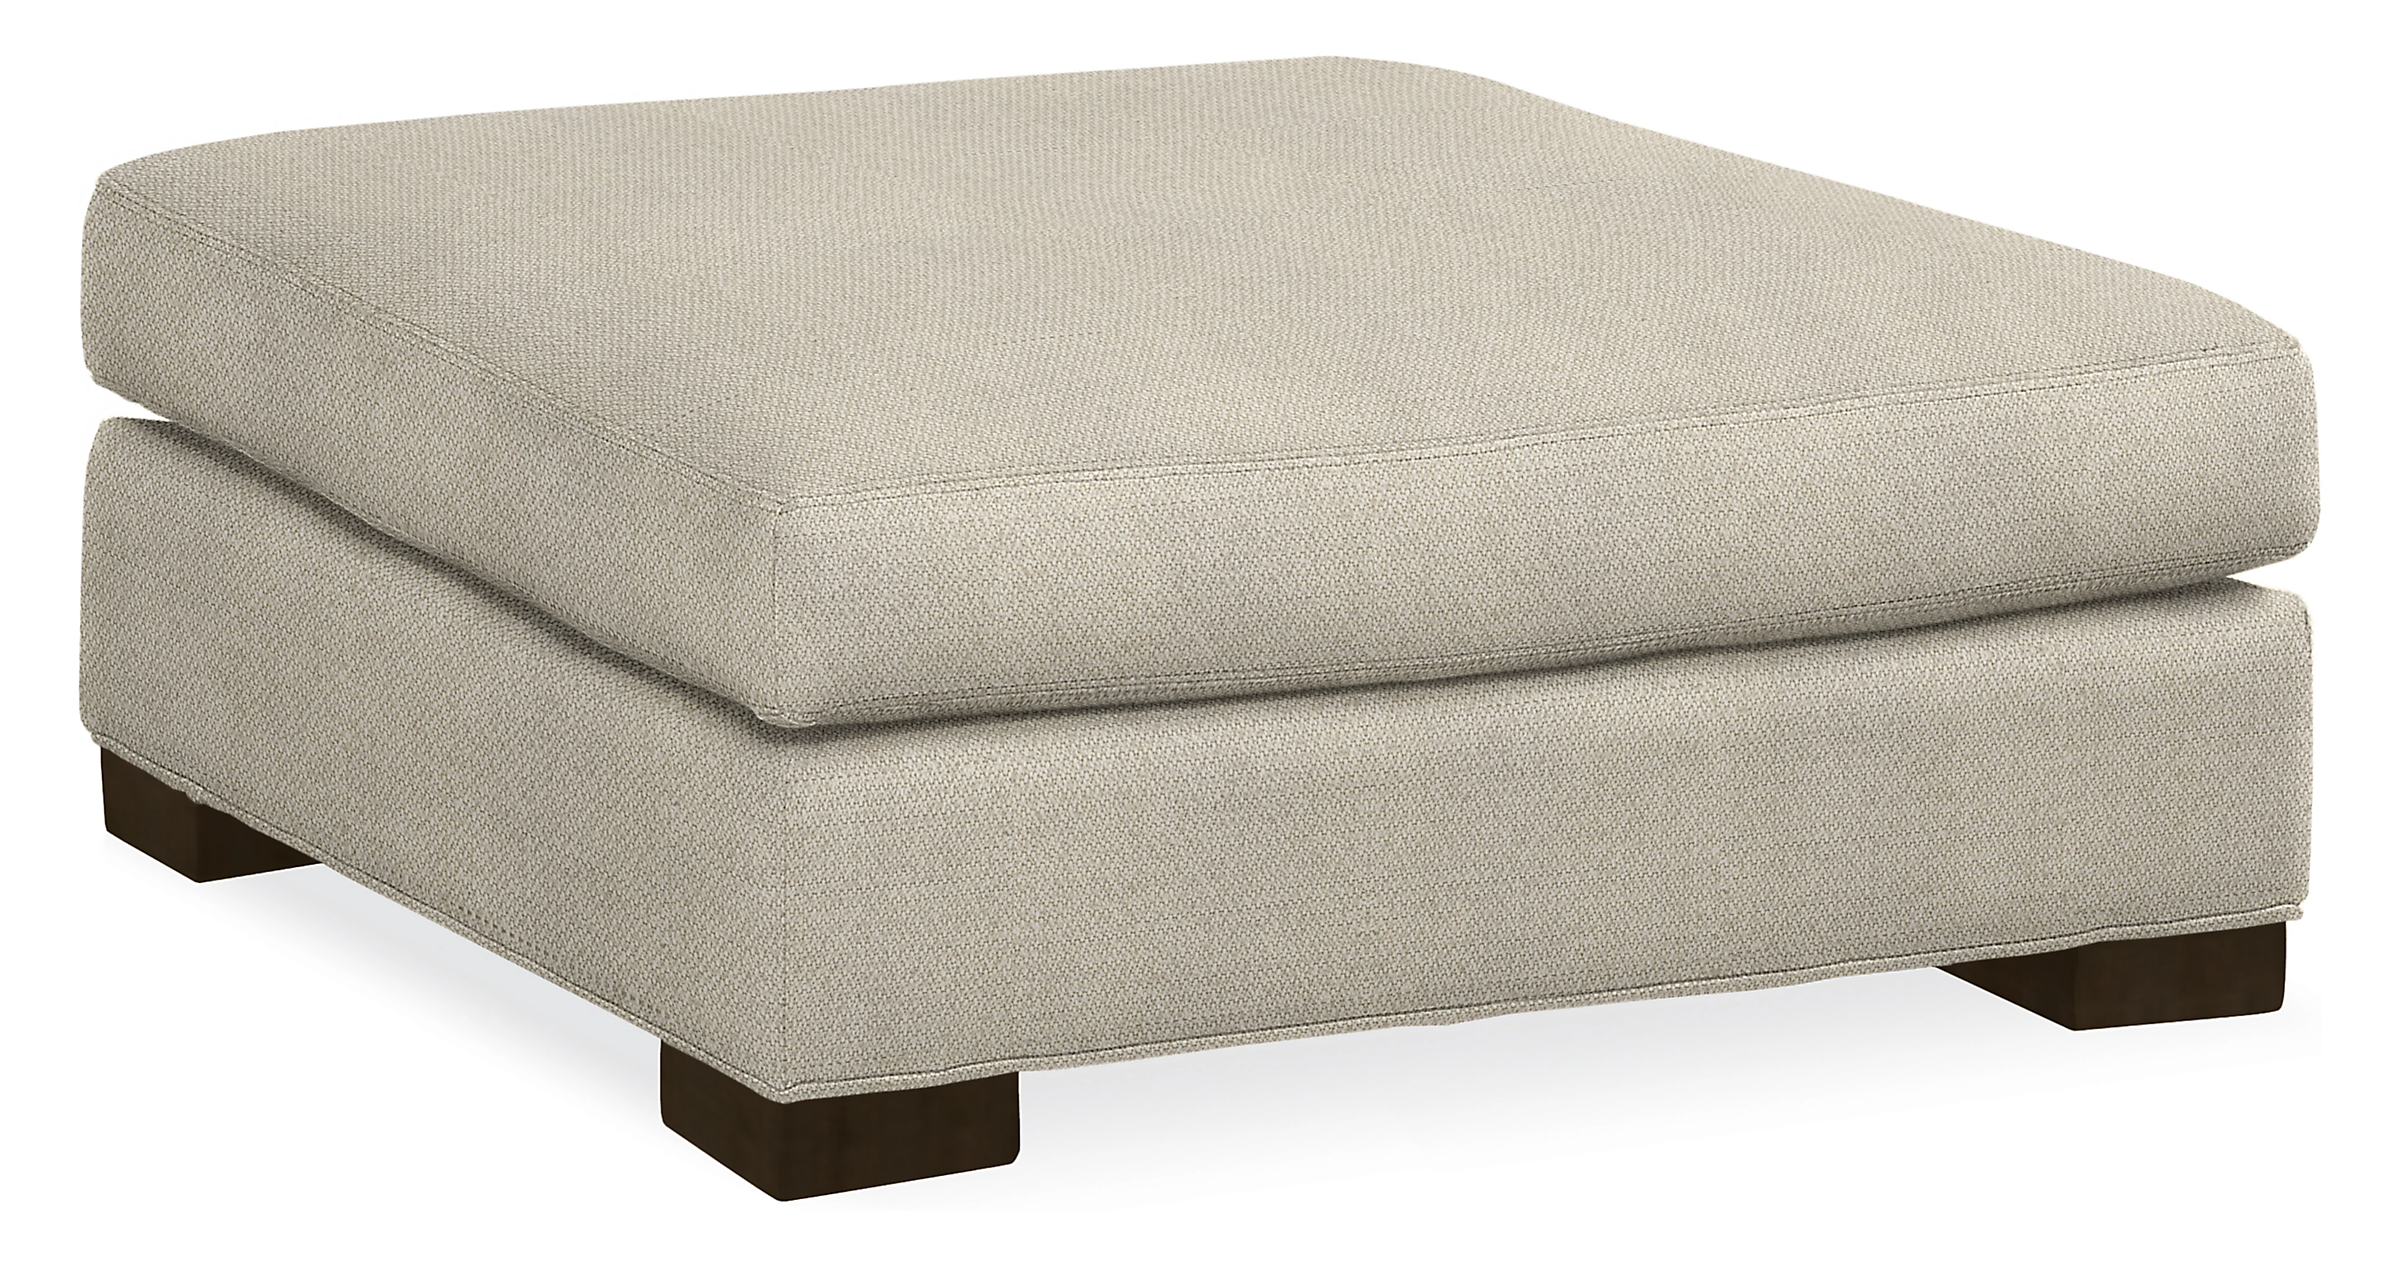 Metro 38w 38d 17h Square Ottoman in Orla Ivory with Charcoal Legs